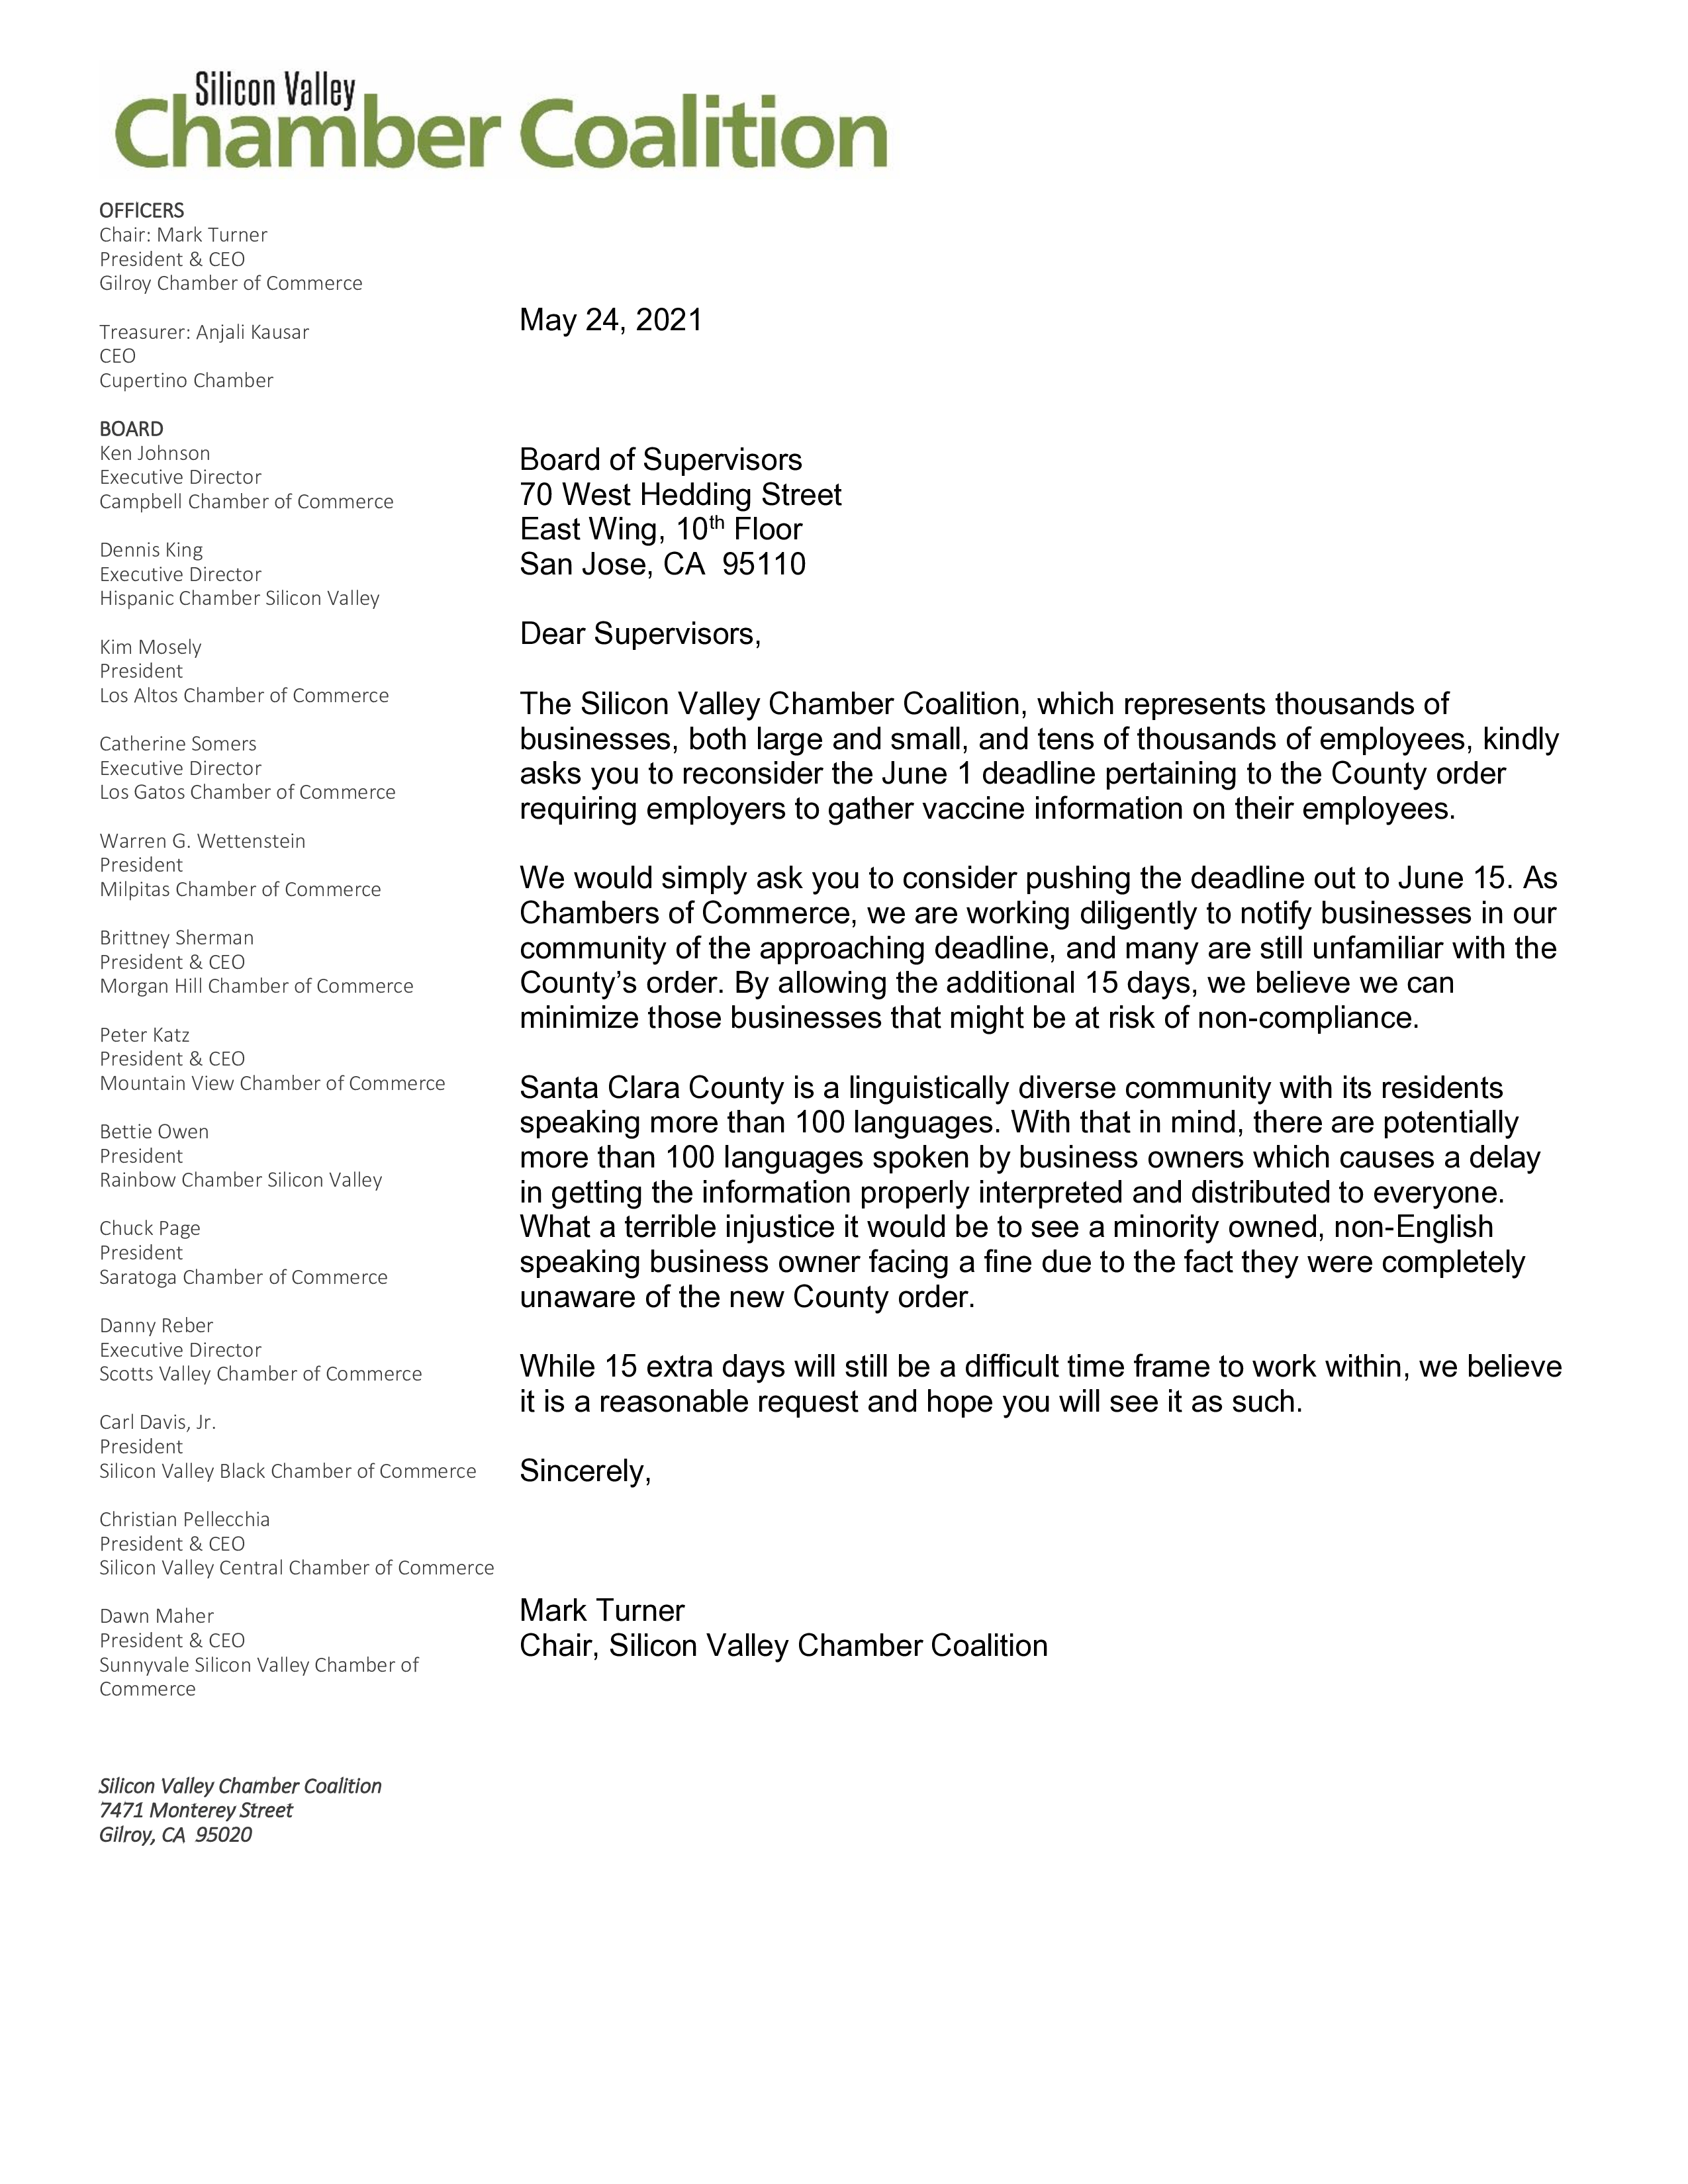 Coalition Vaccine Tracking Extension Request - 05.24.21